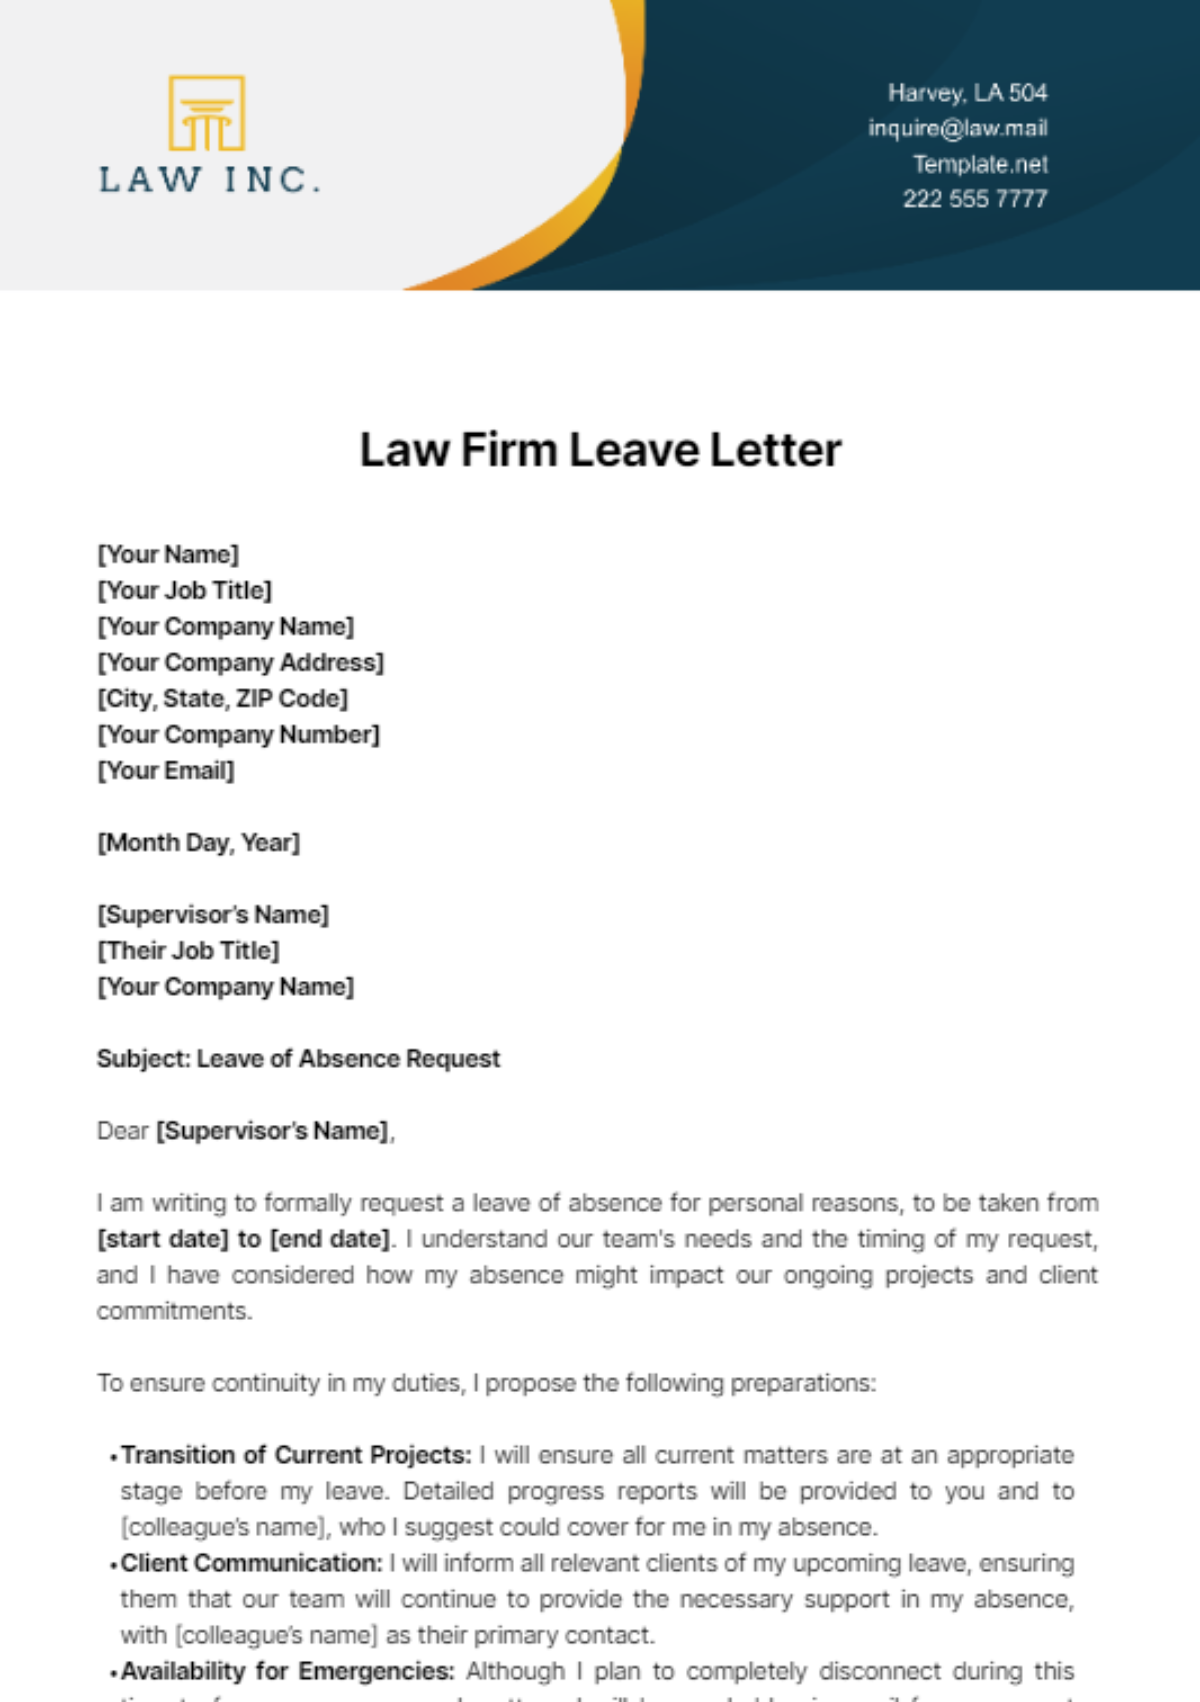 Free Law Firm Leave Letter Template